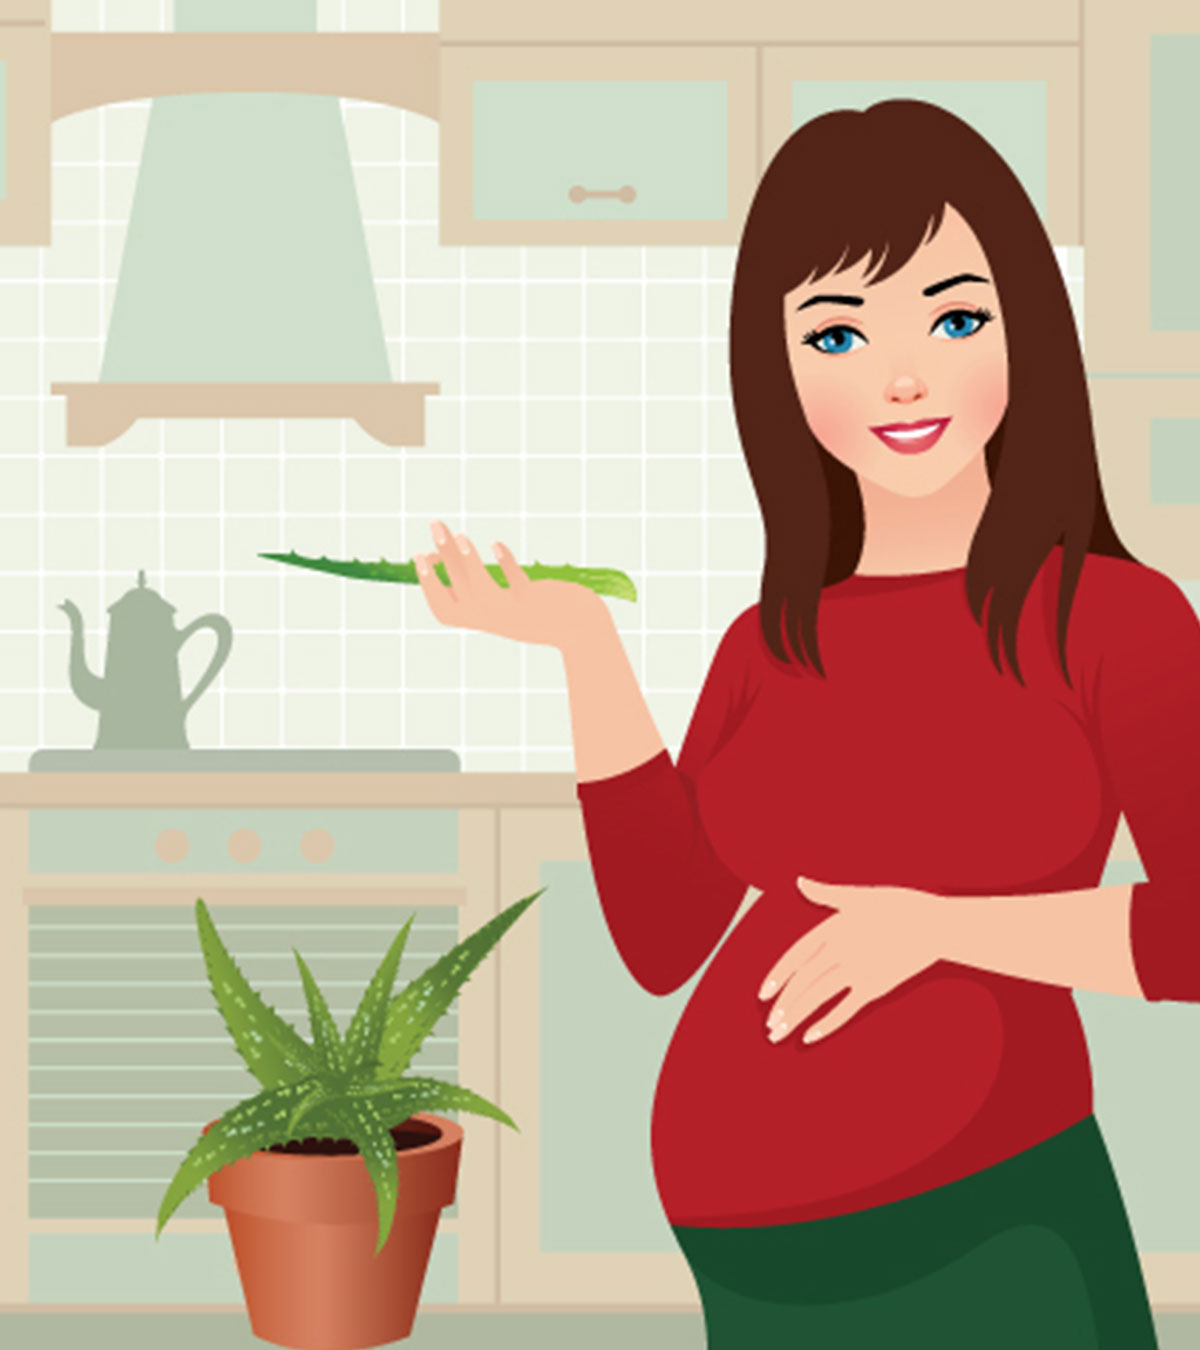 Aloe Vera During Pregnancy: Safety, Benefits, And Risks